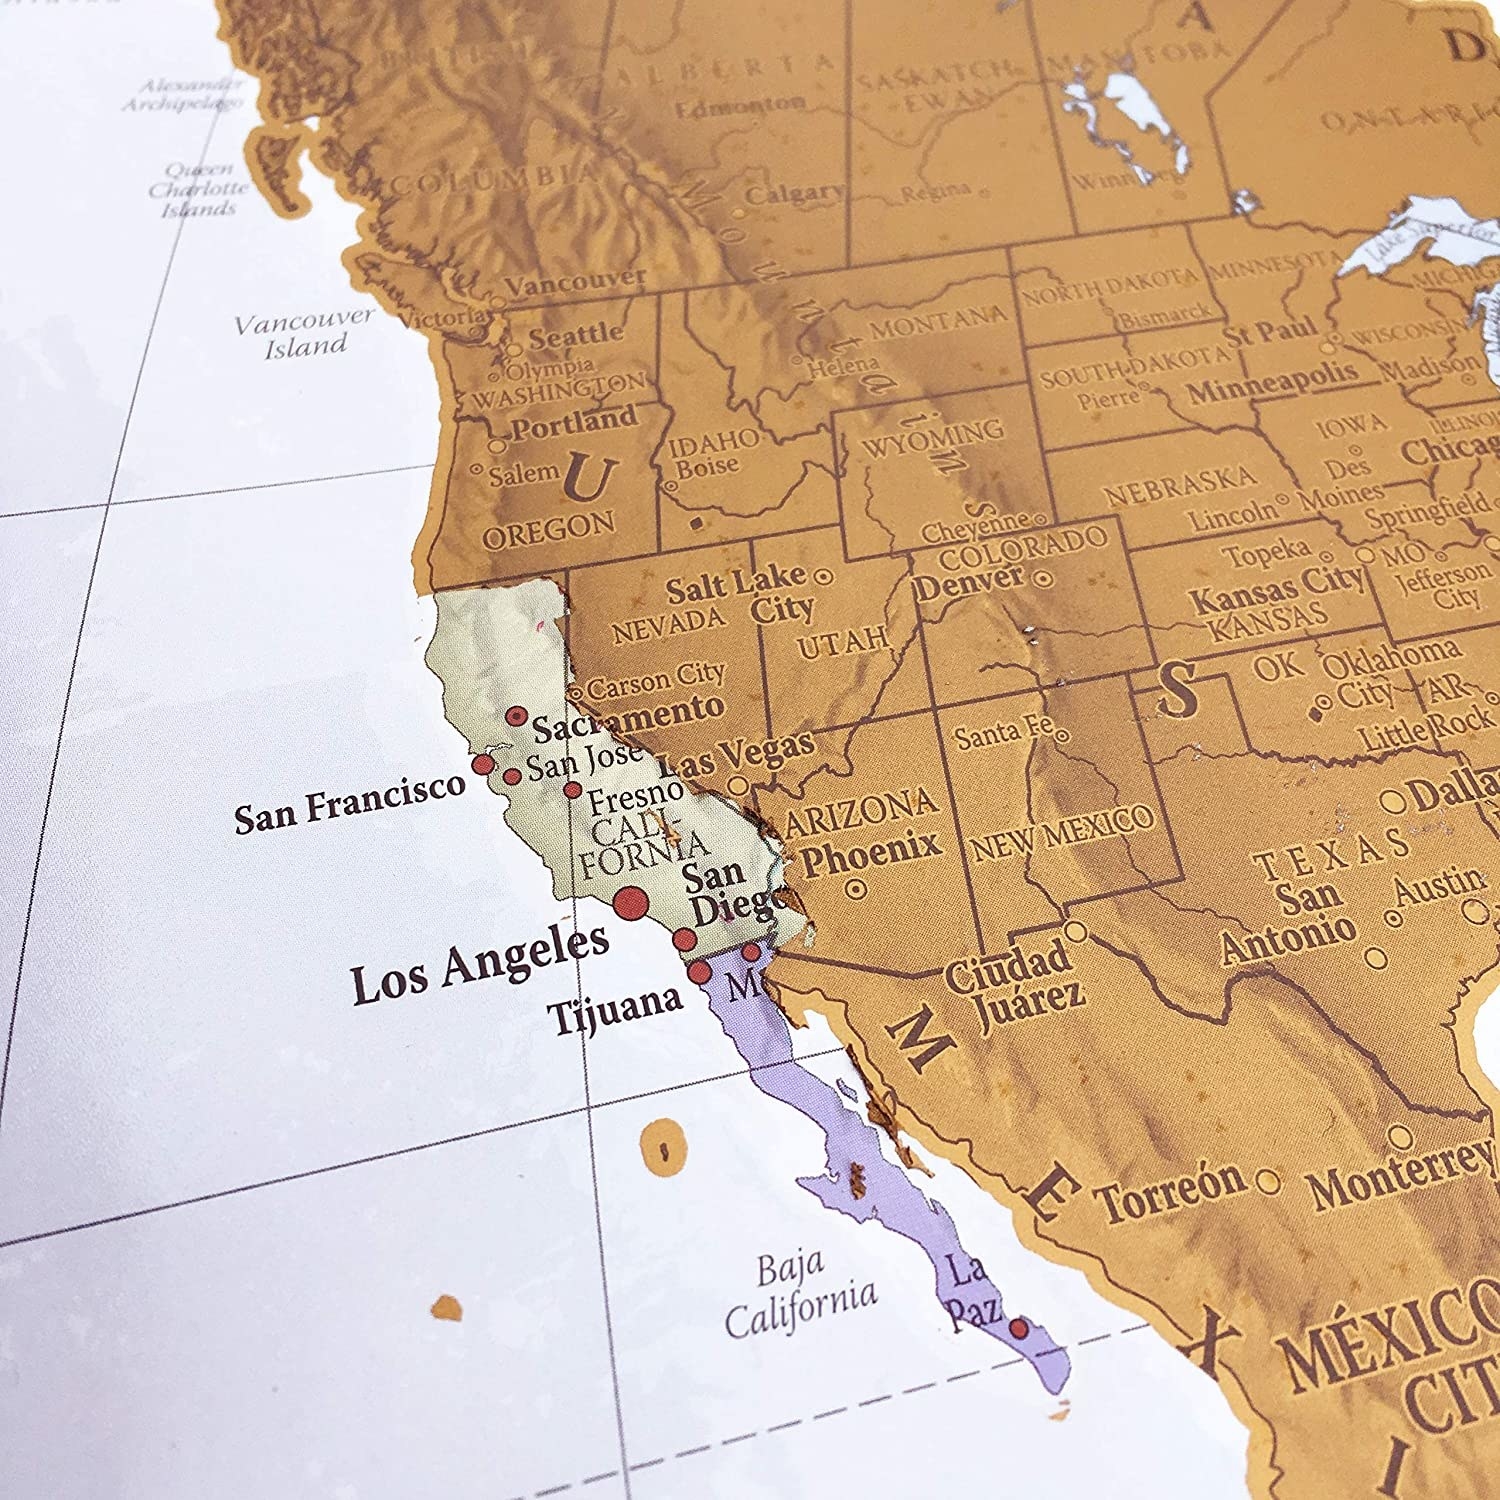 The map zoomed in on the state of California, which is scratched off